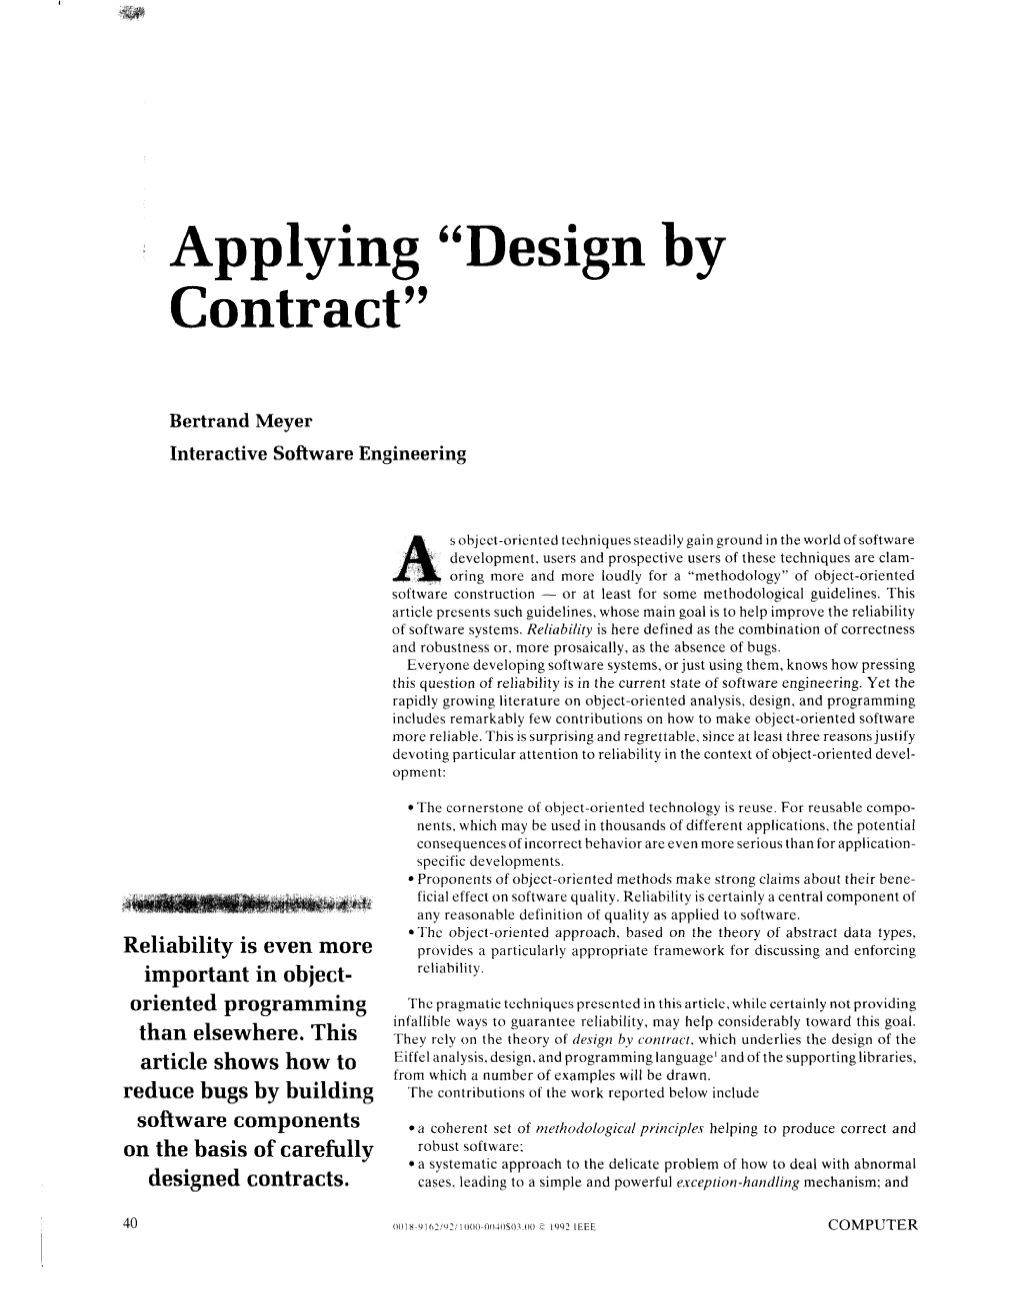 Applying “Design by Contract”